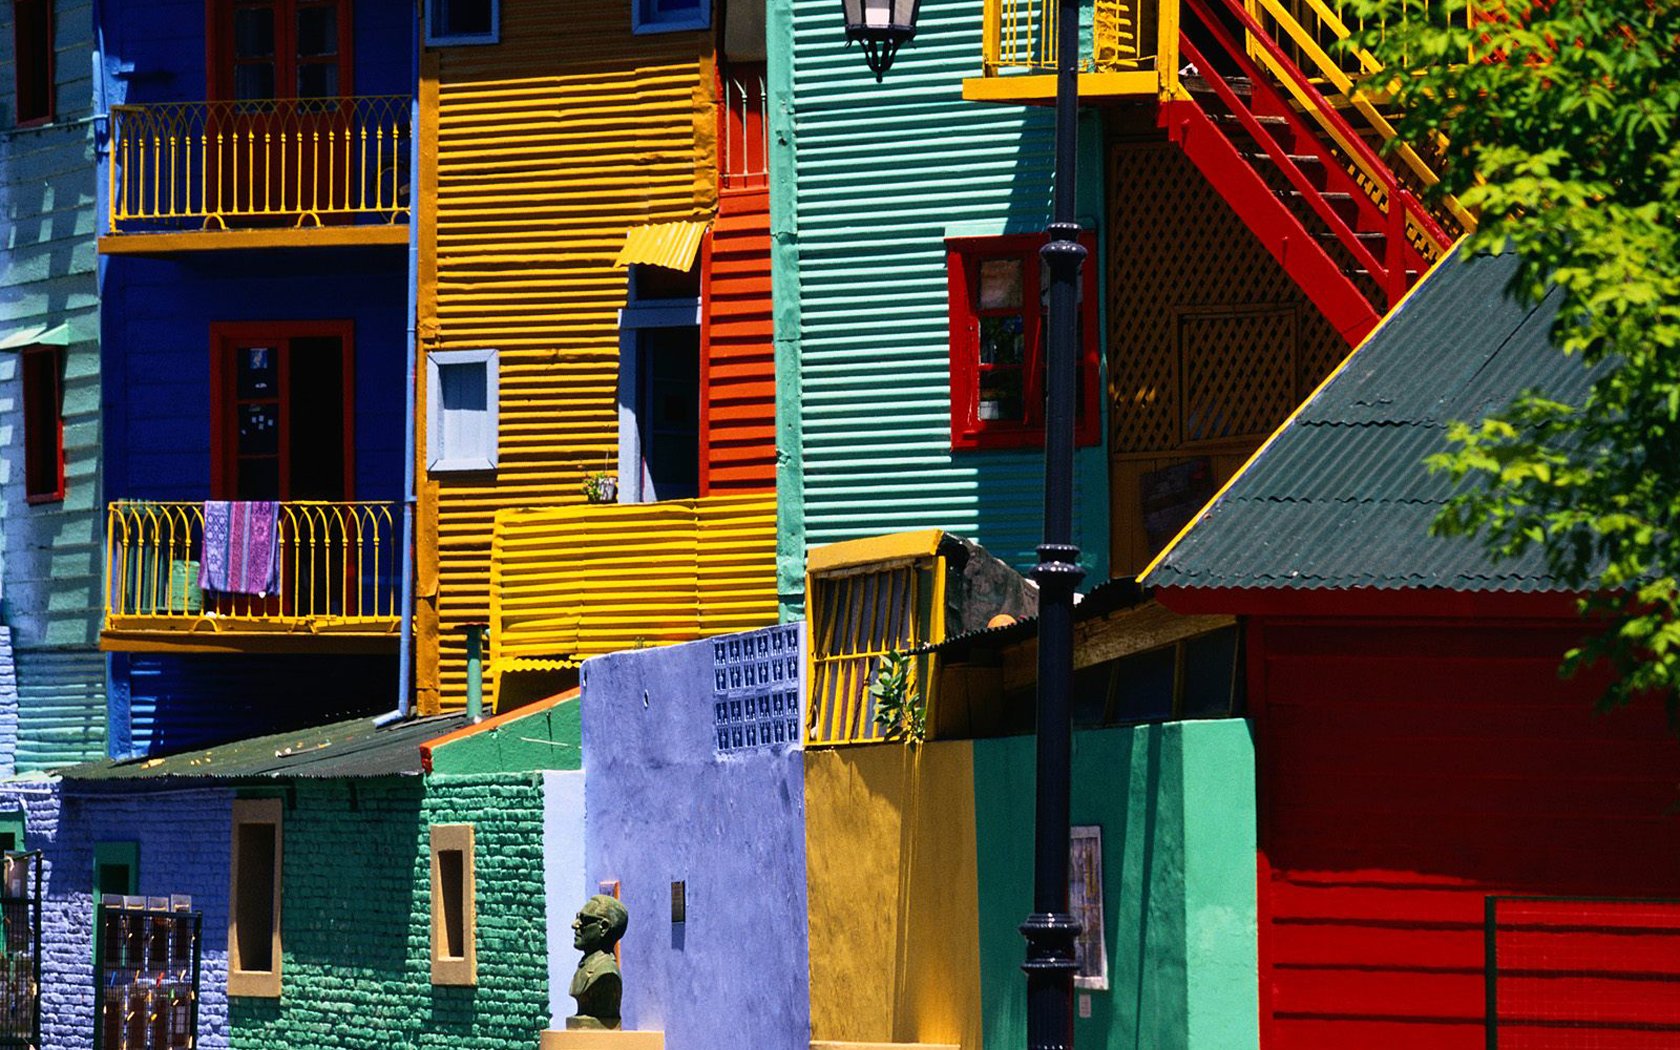 colorful-apartments-buenos-aires-argentina_1680x1050_74037.jpg